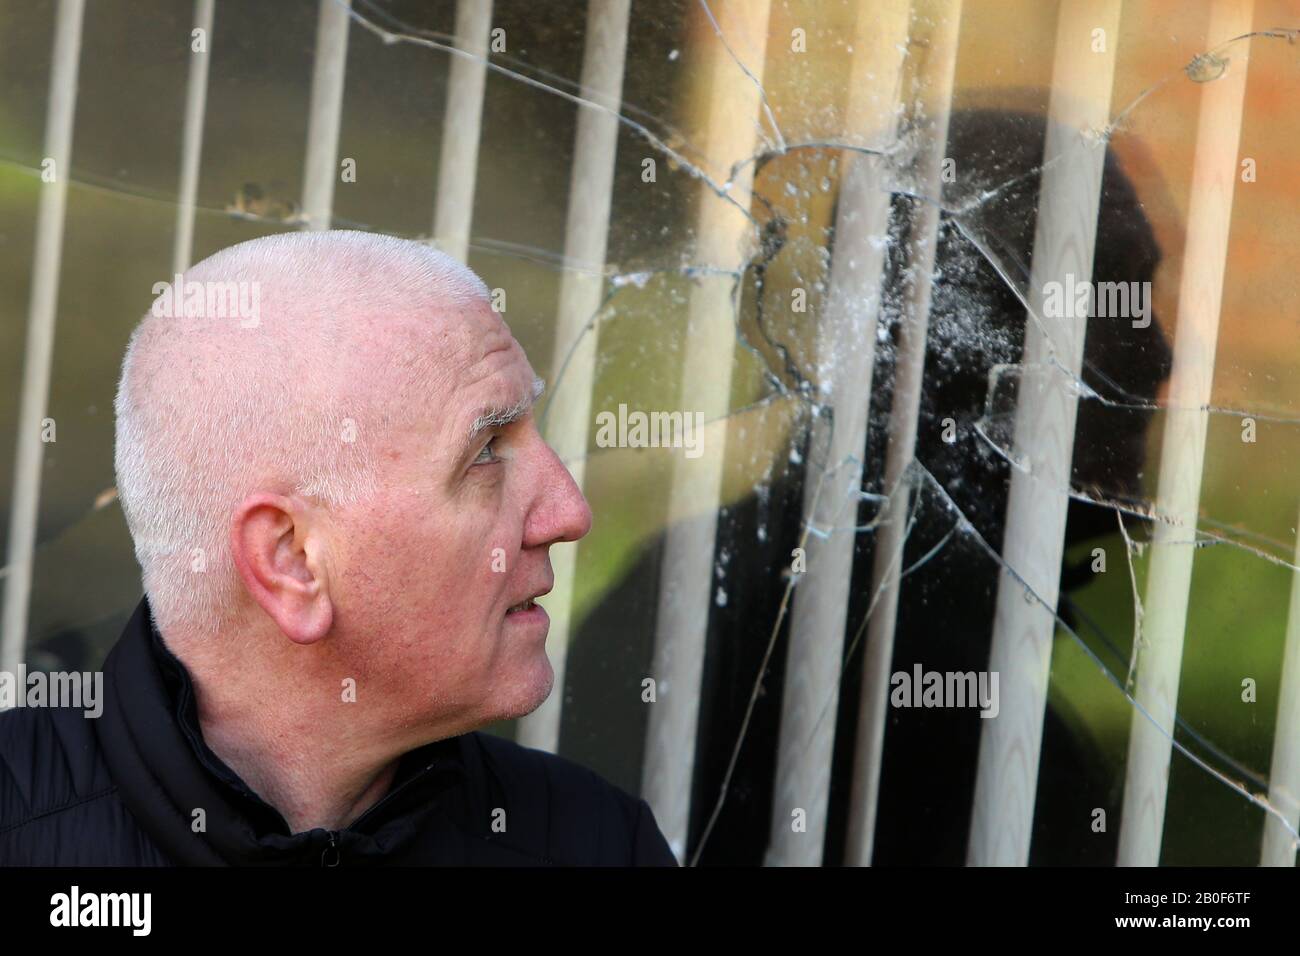 Belfast, Northern Ireland. 20th Feb 2020. Martin Finucane, brother of the murdered solicitor Pat Finucane, stands outside his home in Lenadoon moments after a explosive device was thrown at his home in west Belfast. Martin is the Uncle of North Belfast Sinn Fein MP John Finucane. Credit: Irish Eye/Alamy Live News Stock Photo